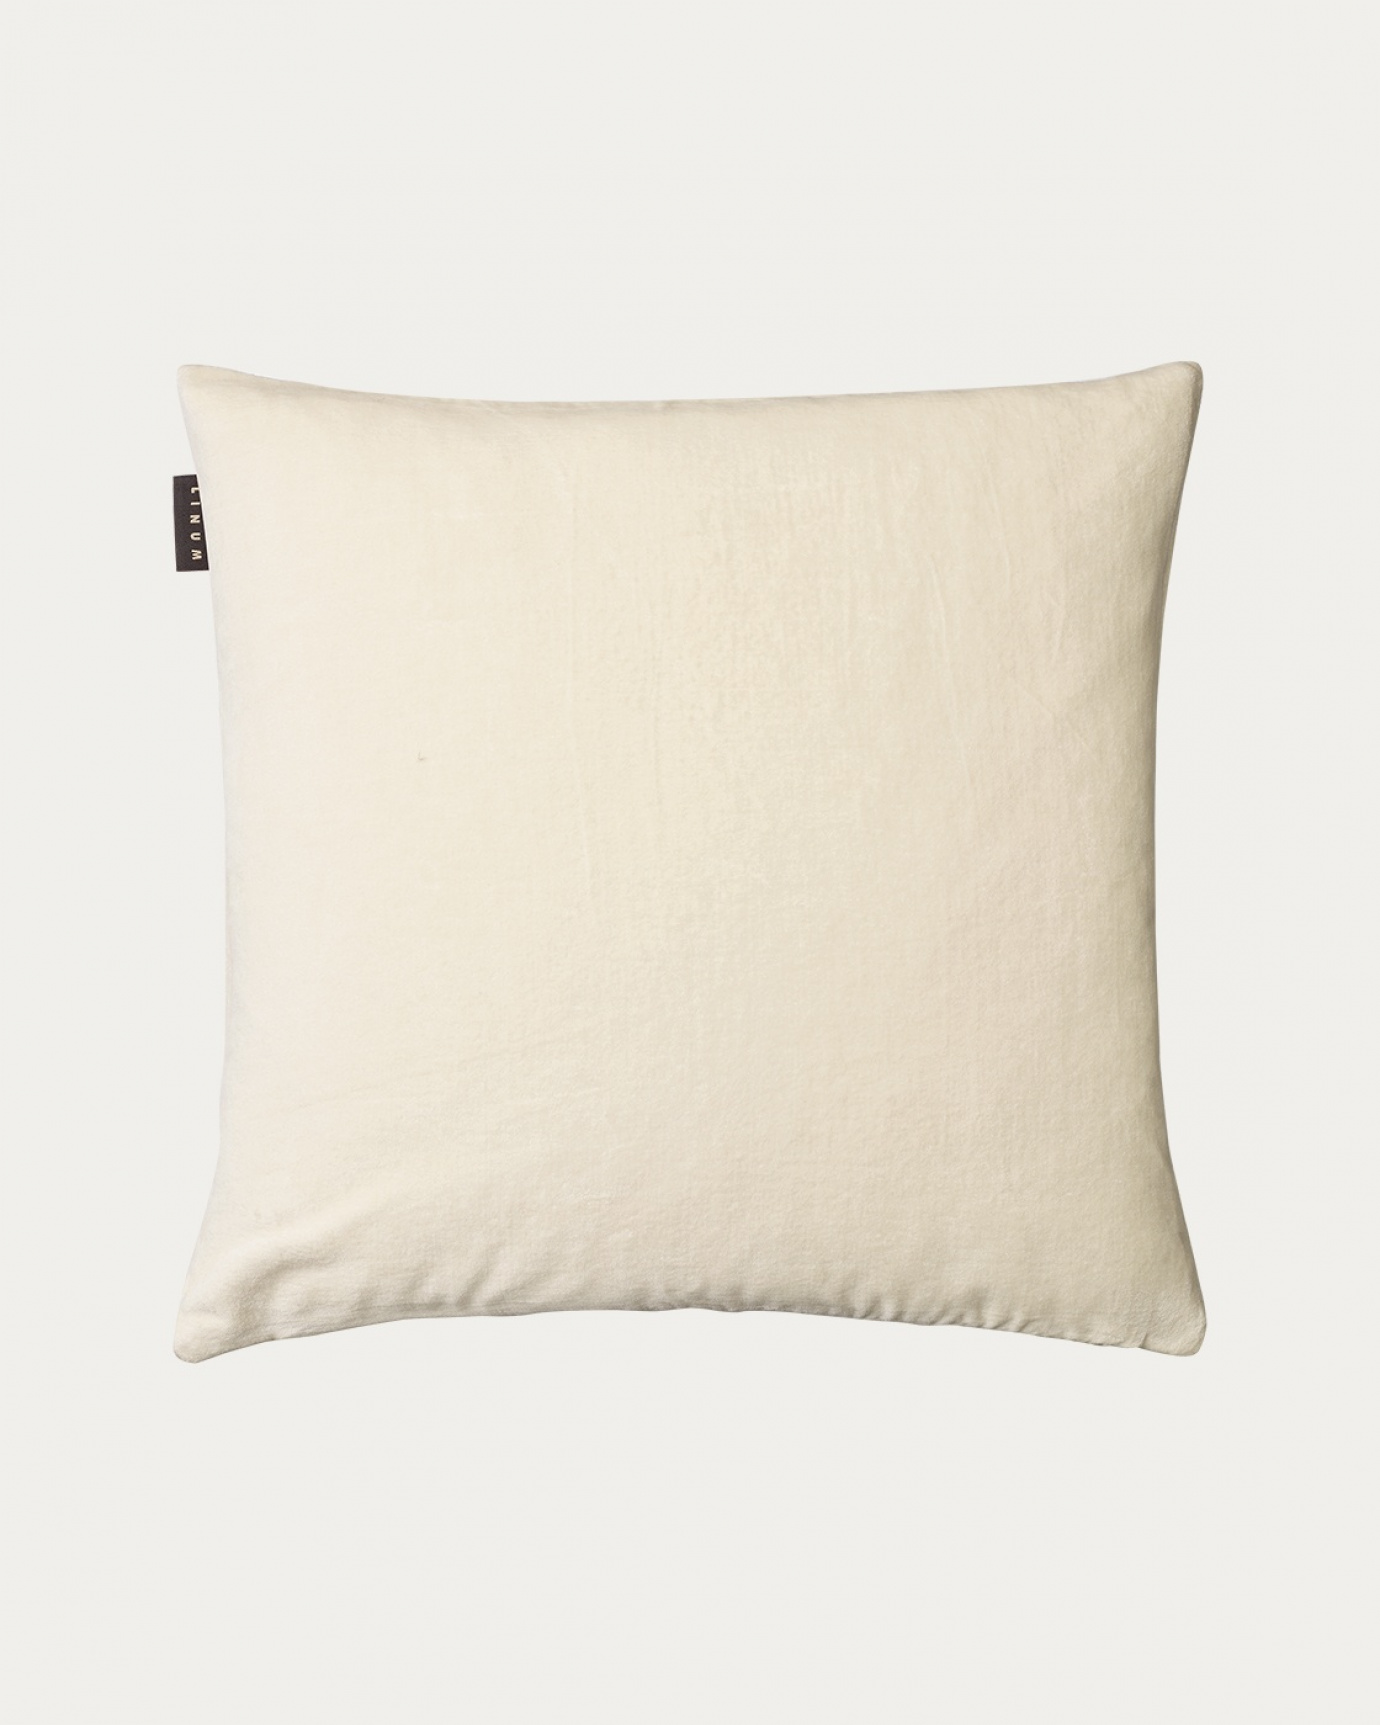 Product image creamy beige PAOLO cushion cover in soft cotton velvet from LINUM DESIGN. Size 50x50 cm.